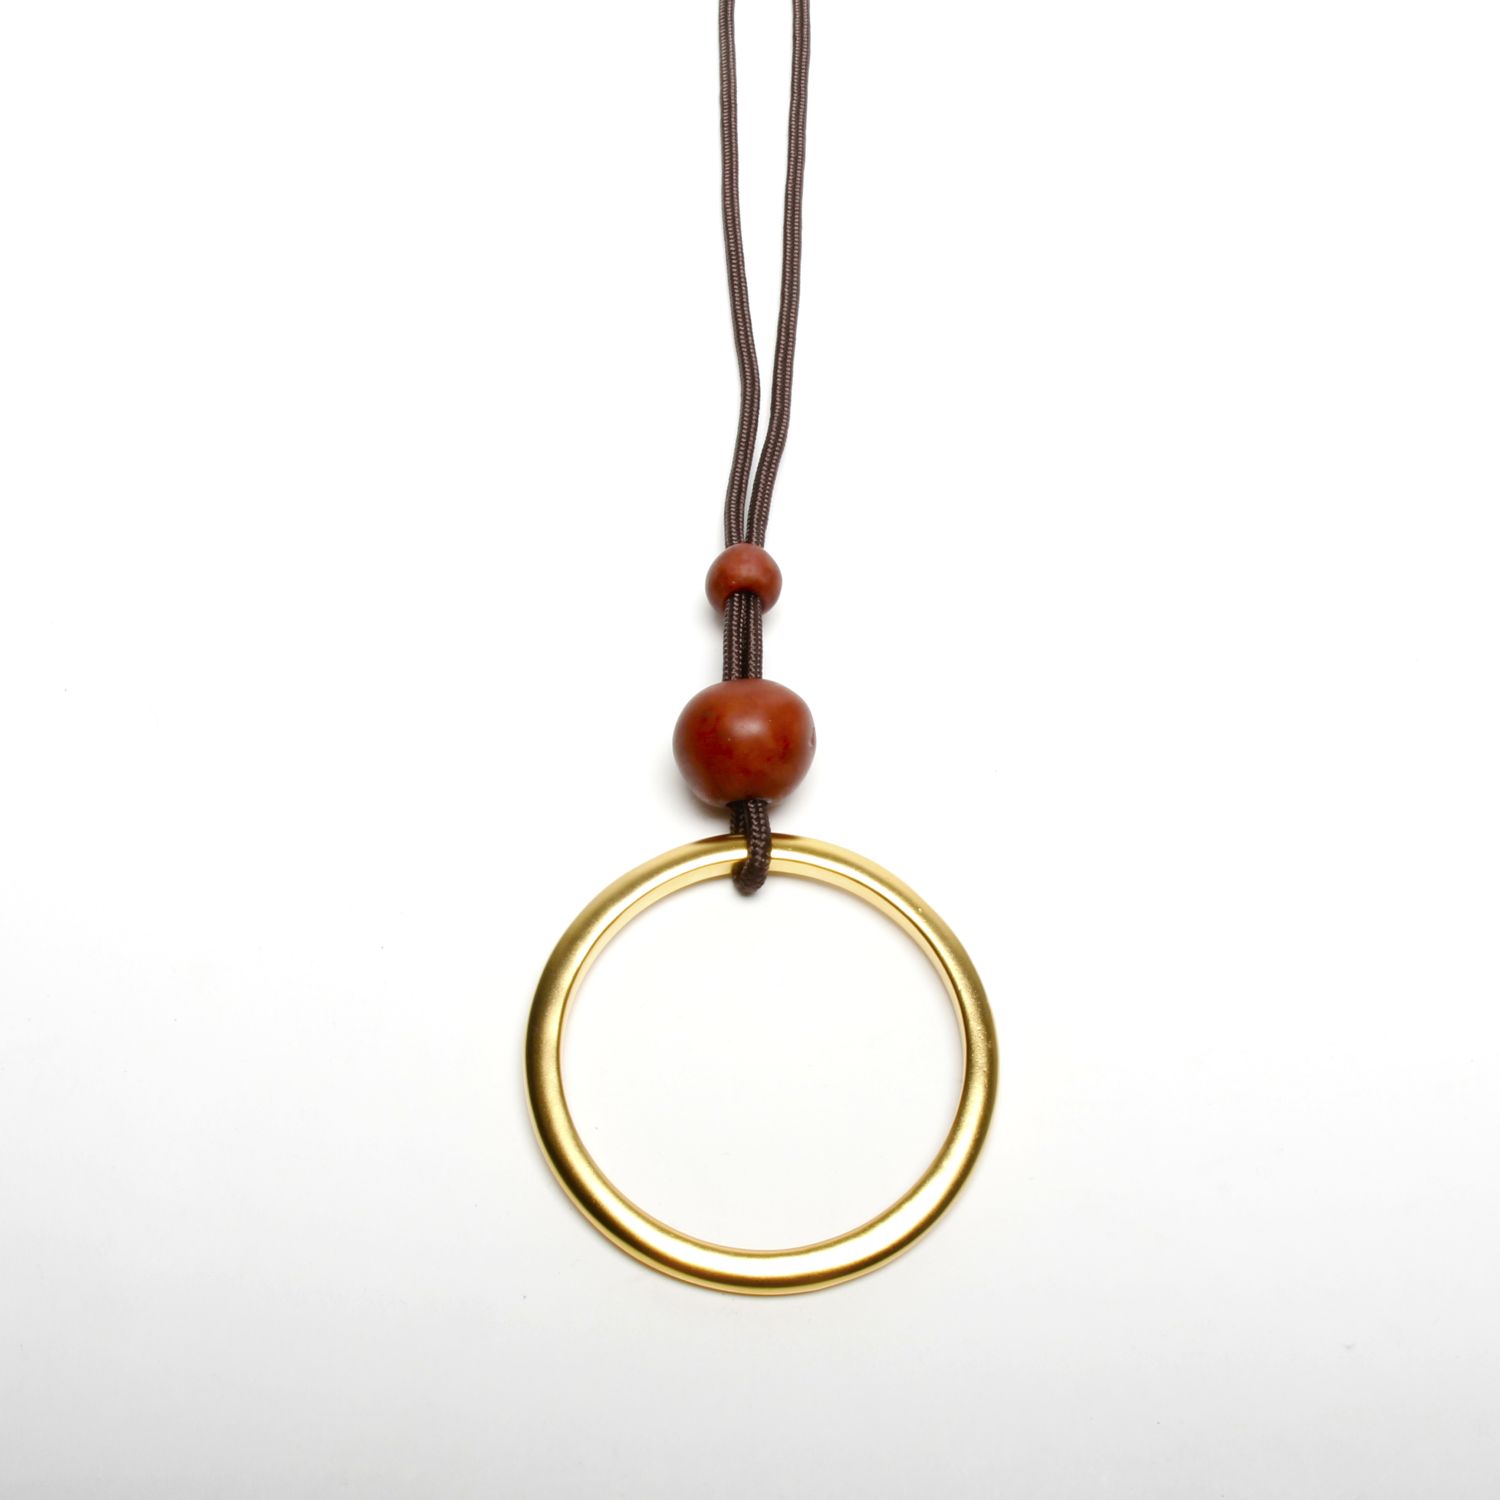 Two A: Gold Circle Pendant Necklace with Resin Beads Product Image 2 of 2